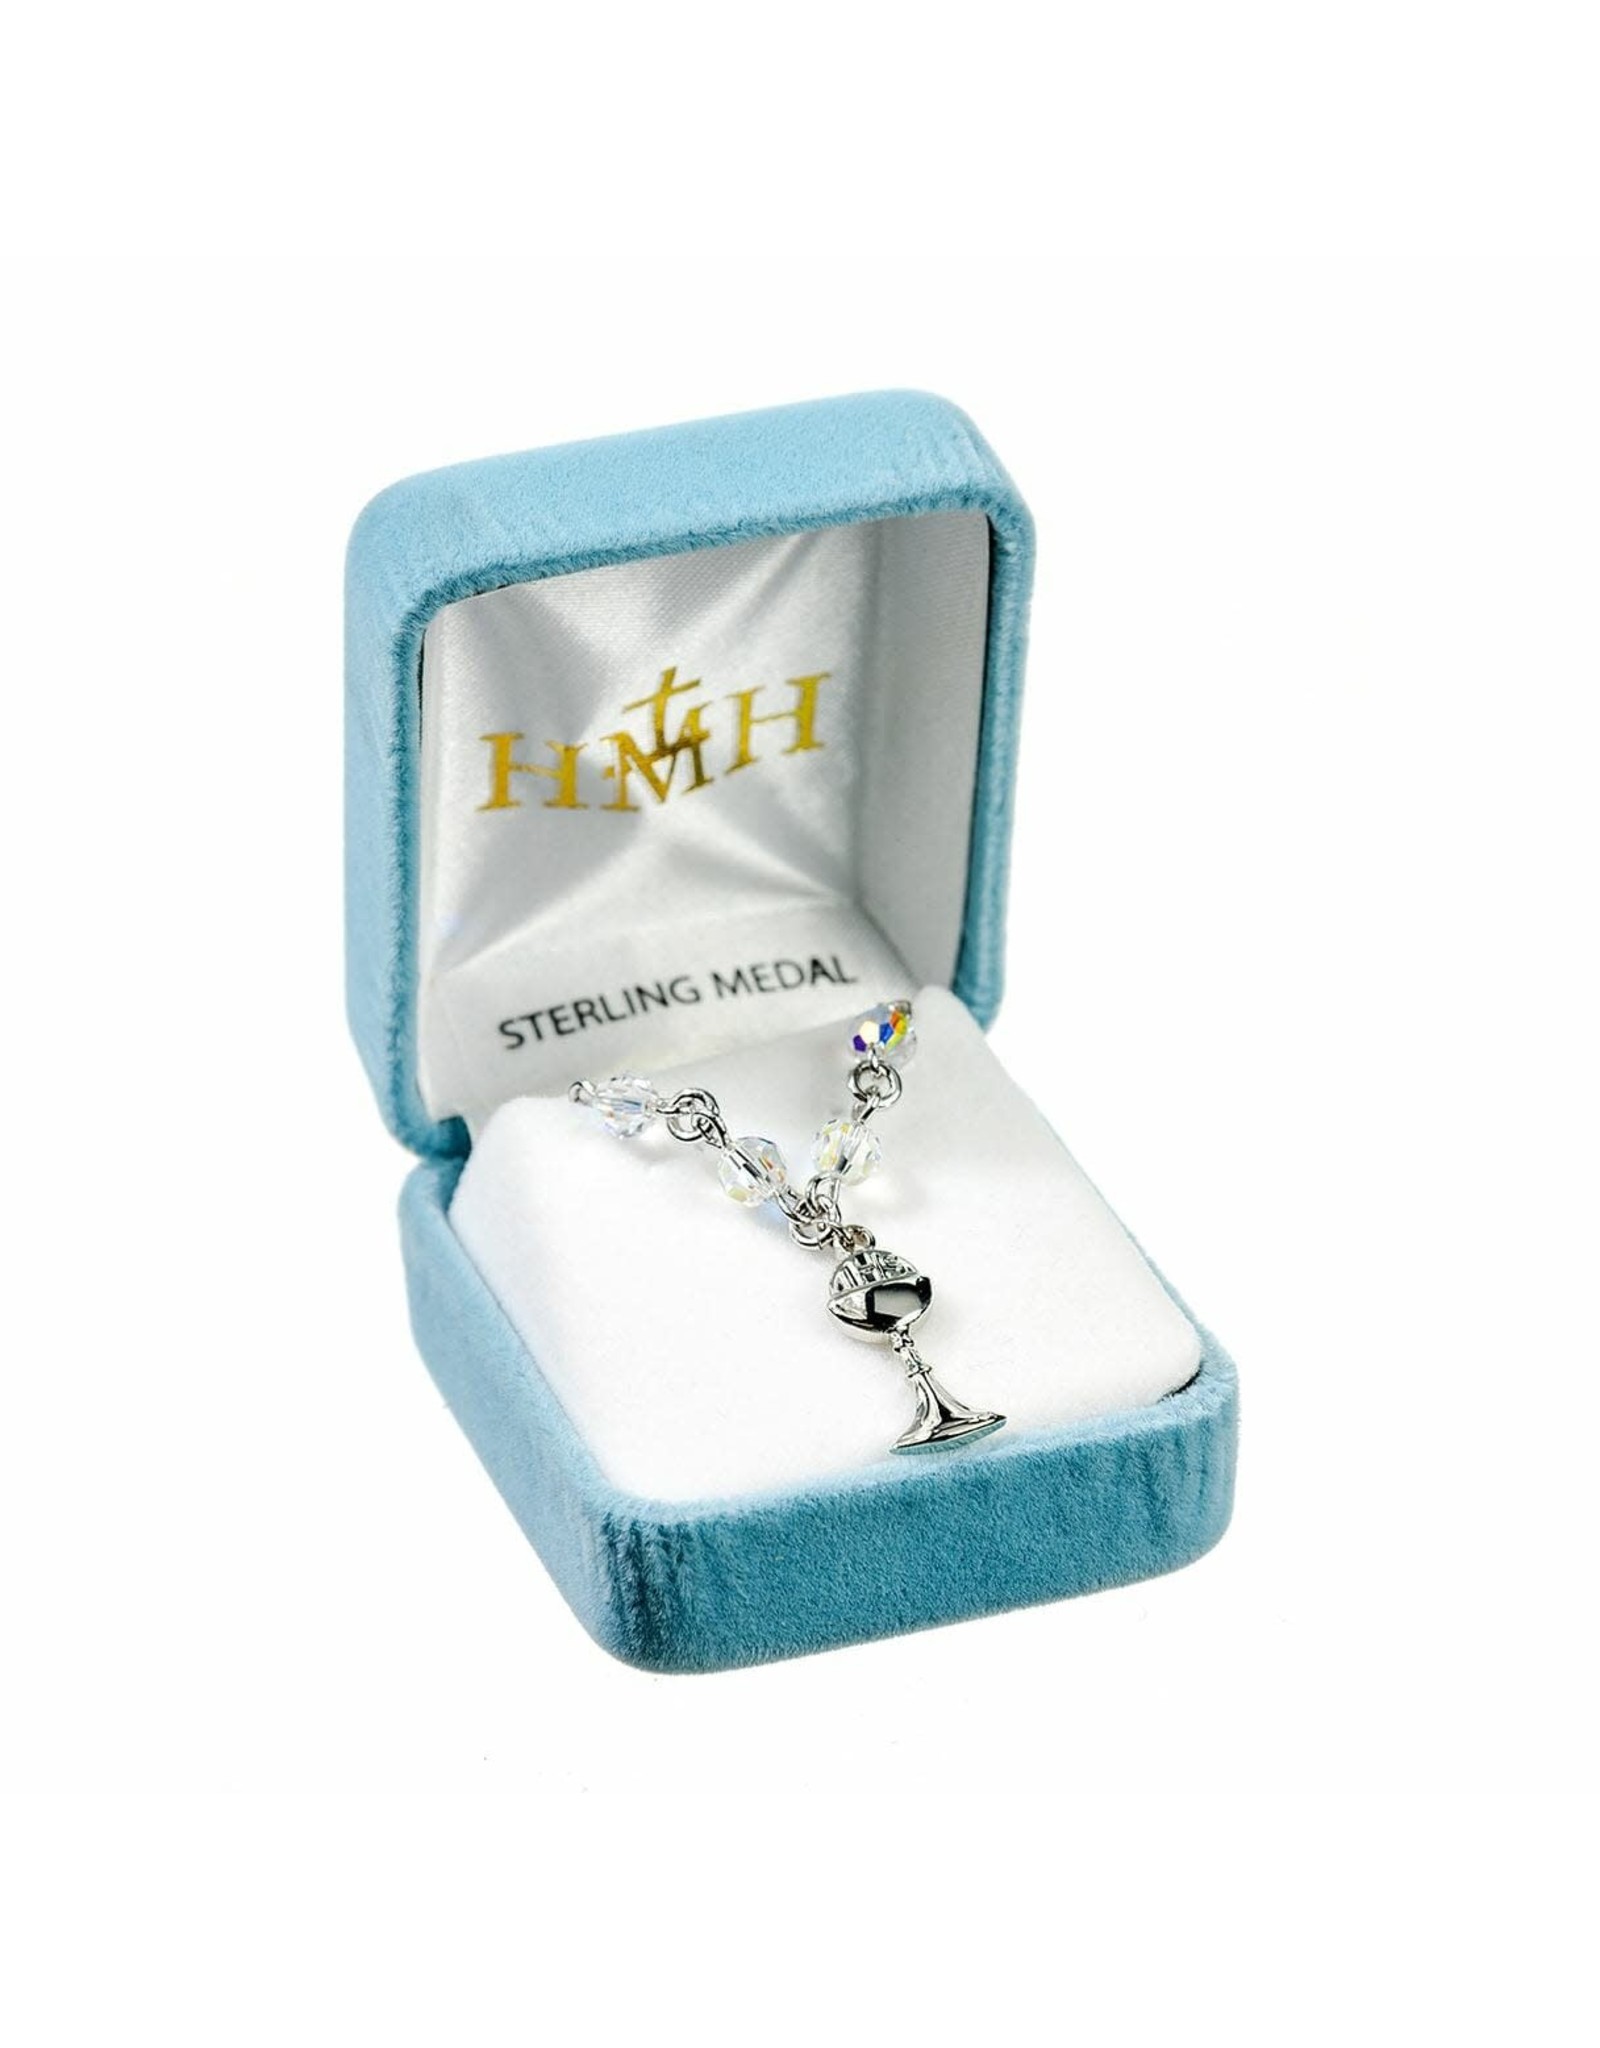 HMH First Communion Swarovski Crystal Necklace with Sterling Silver Chalice, 18" Chain